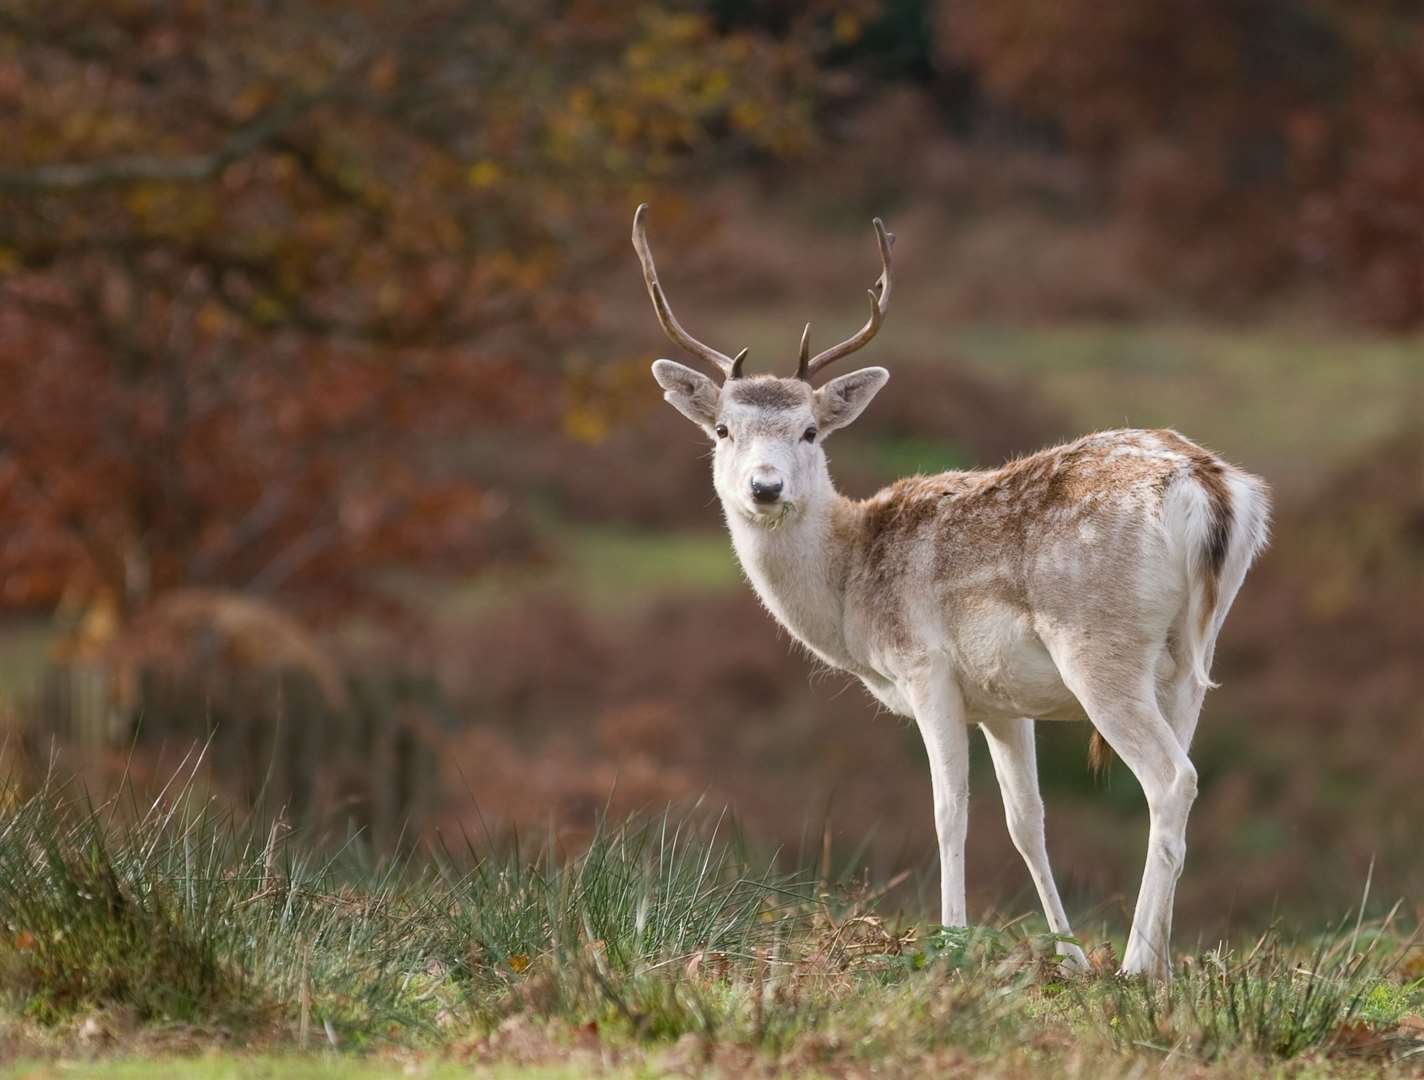 There are lots of deer around the Knockholt area